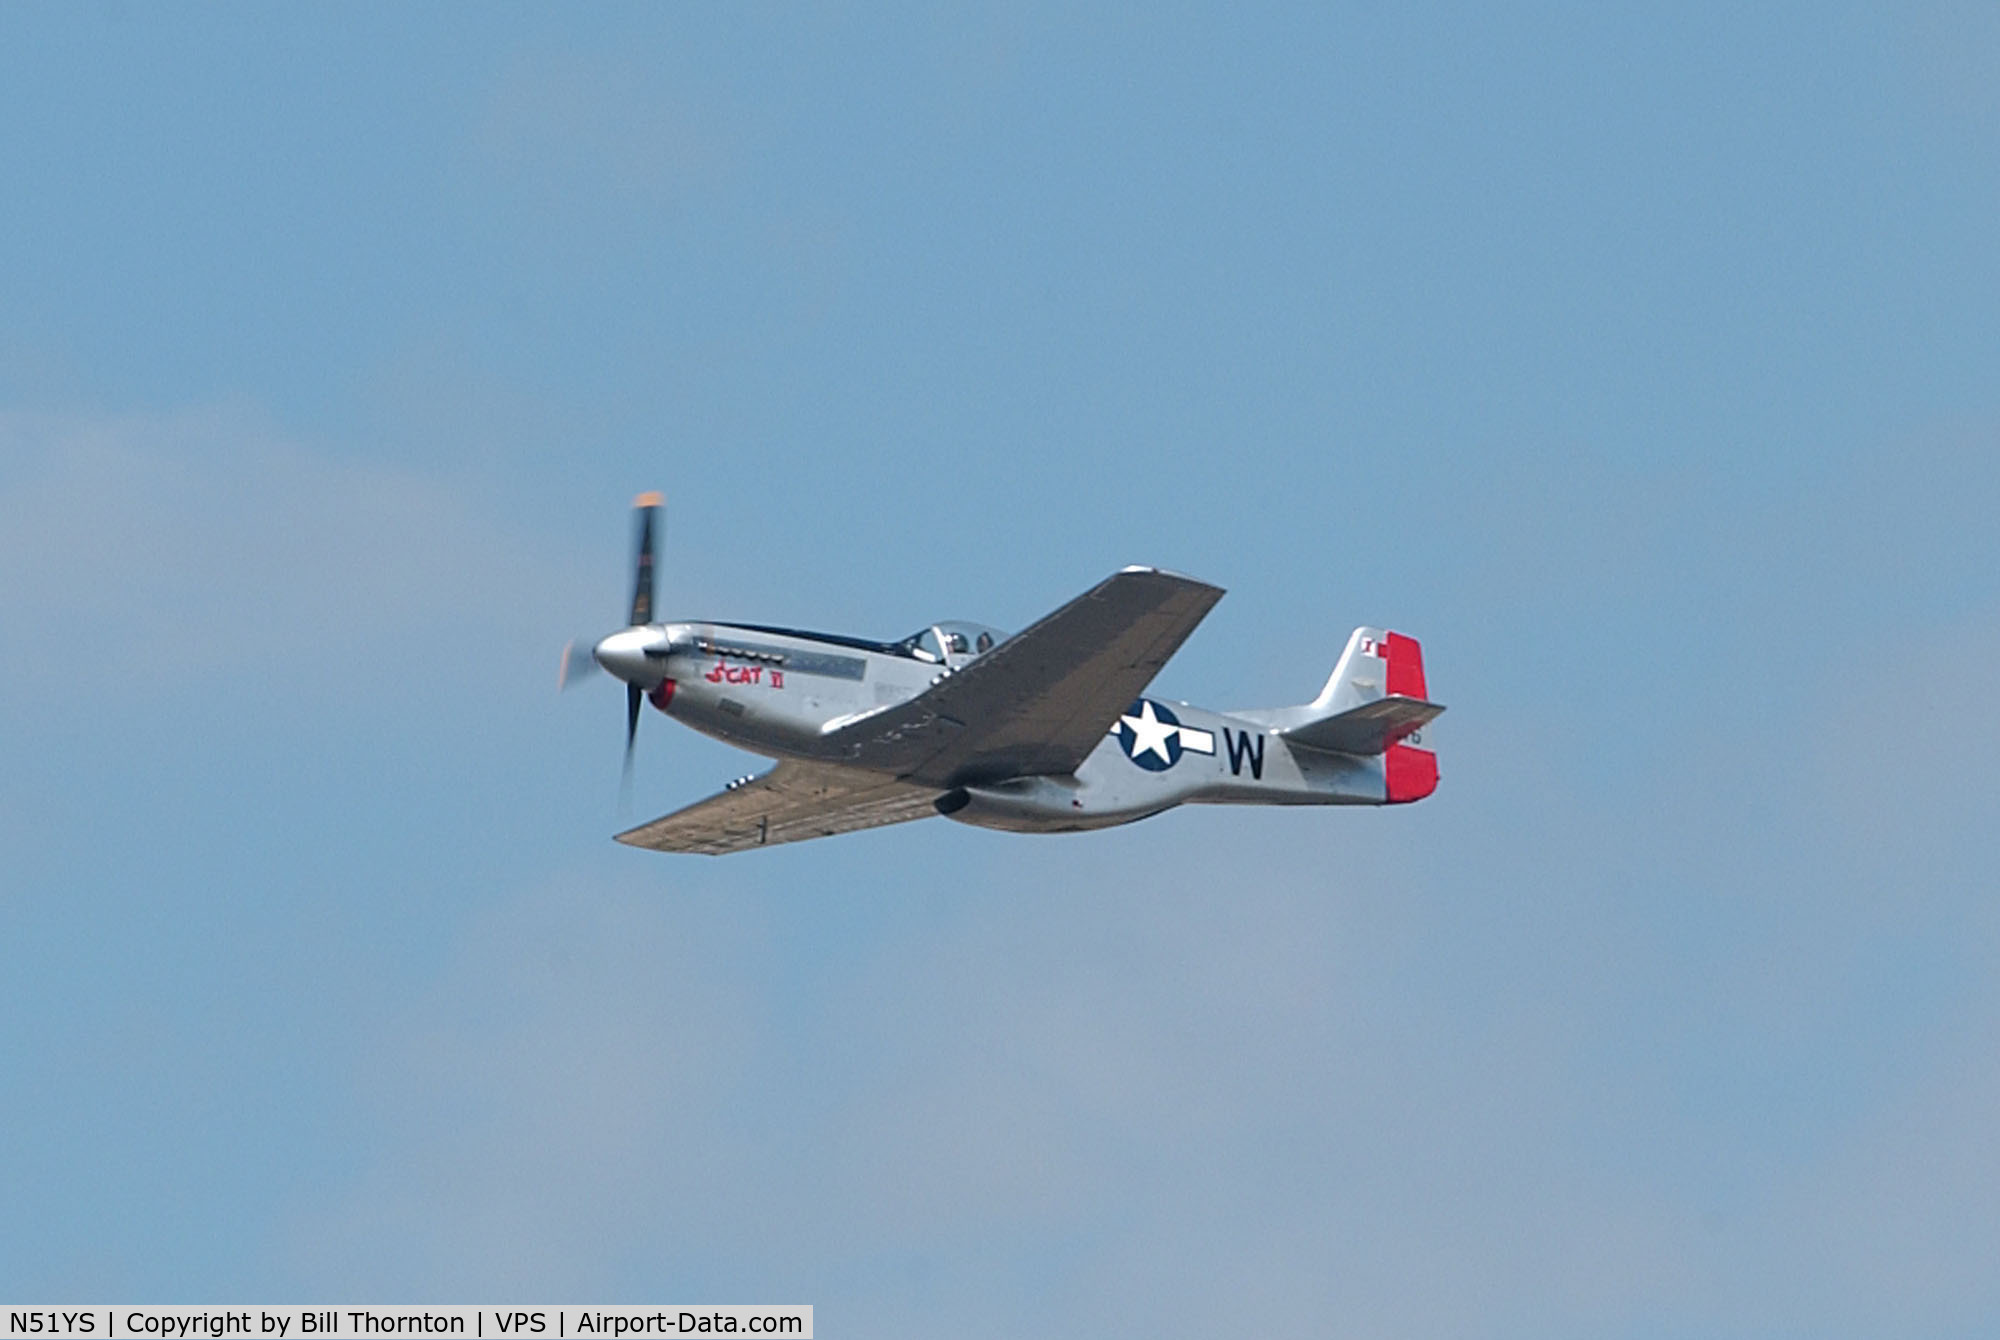 N51YS, 1945 North American P-51D Mustang C/N 122-39285, N51YS, Tail No. 411746, a P-51D (25NA), owned by Denny Hickman of Alabama, makes a fast low approach to Rwy 19 at Eglin AFB, Fla. during a vintage aircraft demo during the 2010 Eglin Air Show. (an f-stop 5.6 photograph)